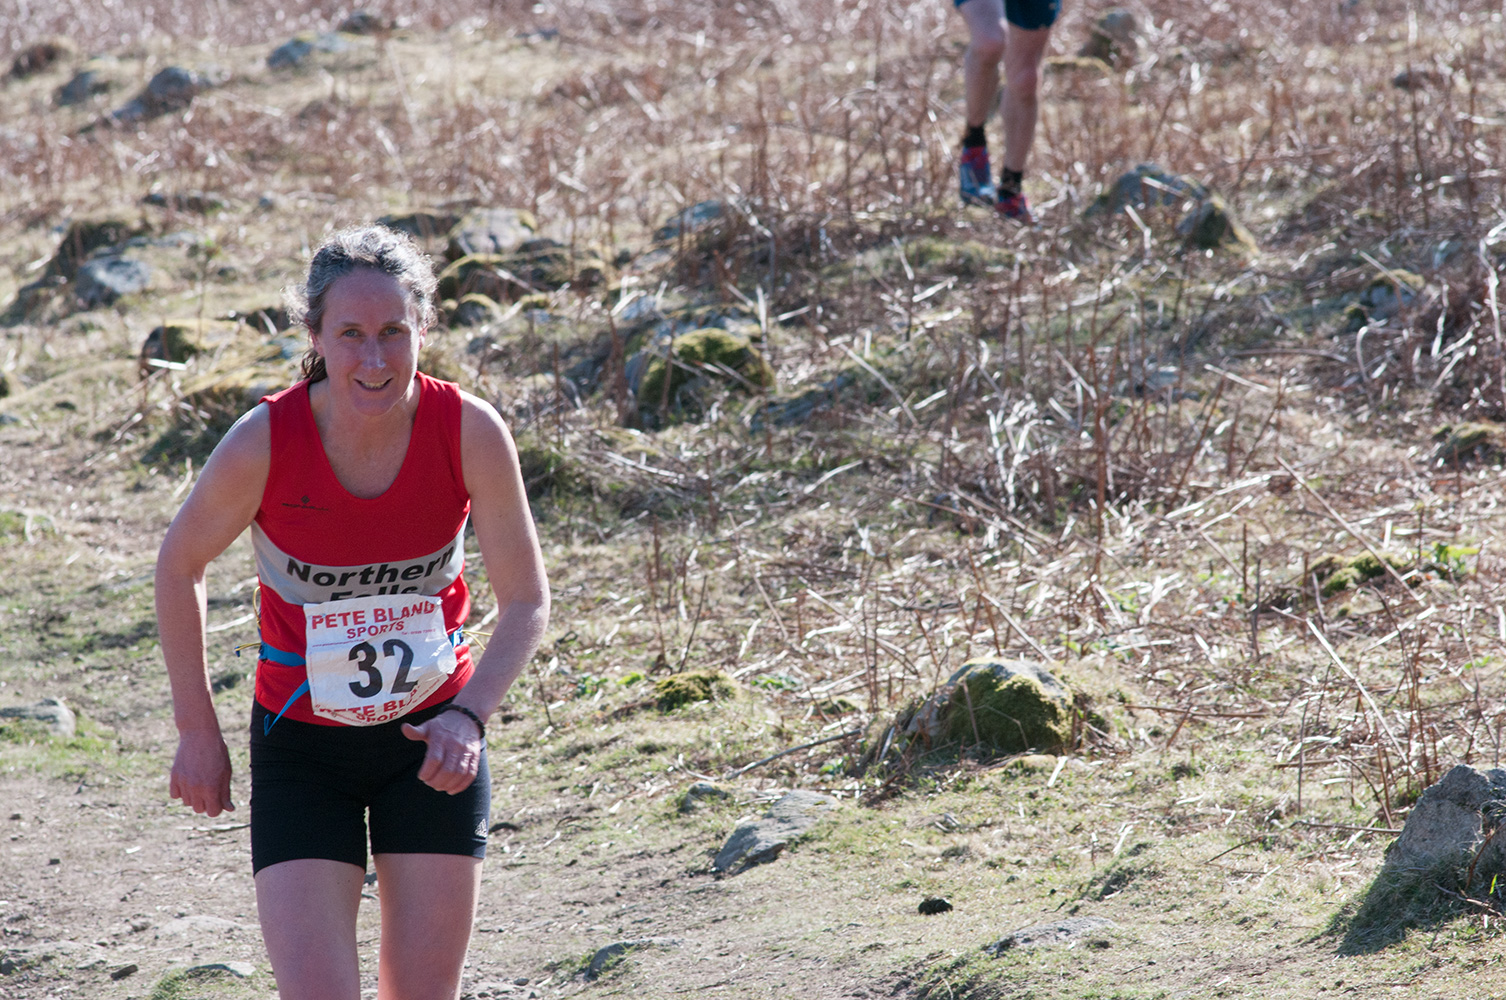 Natalie Hawkrigg of Northern Fells Running Club. This is a 10.6Km race from the Strands Inn, Nether Wasdale, Cumbria. The 2016 race was held on 19th March.